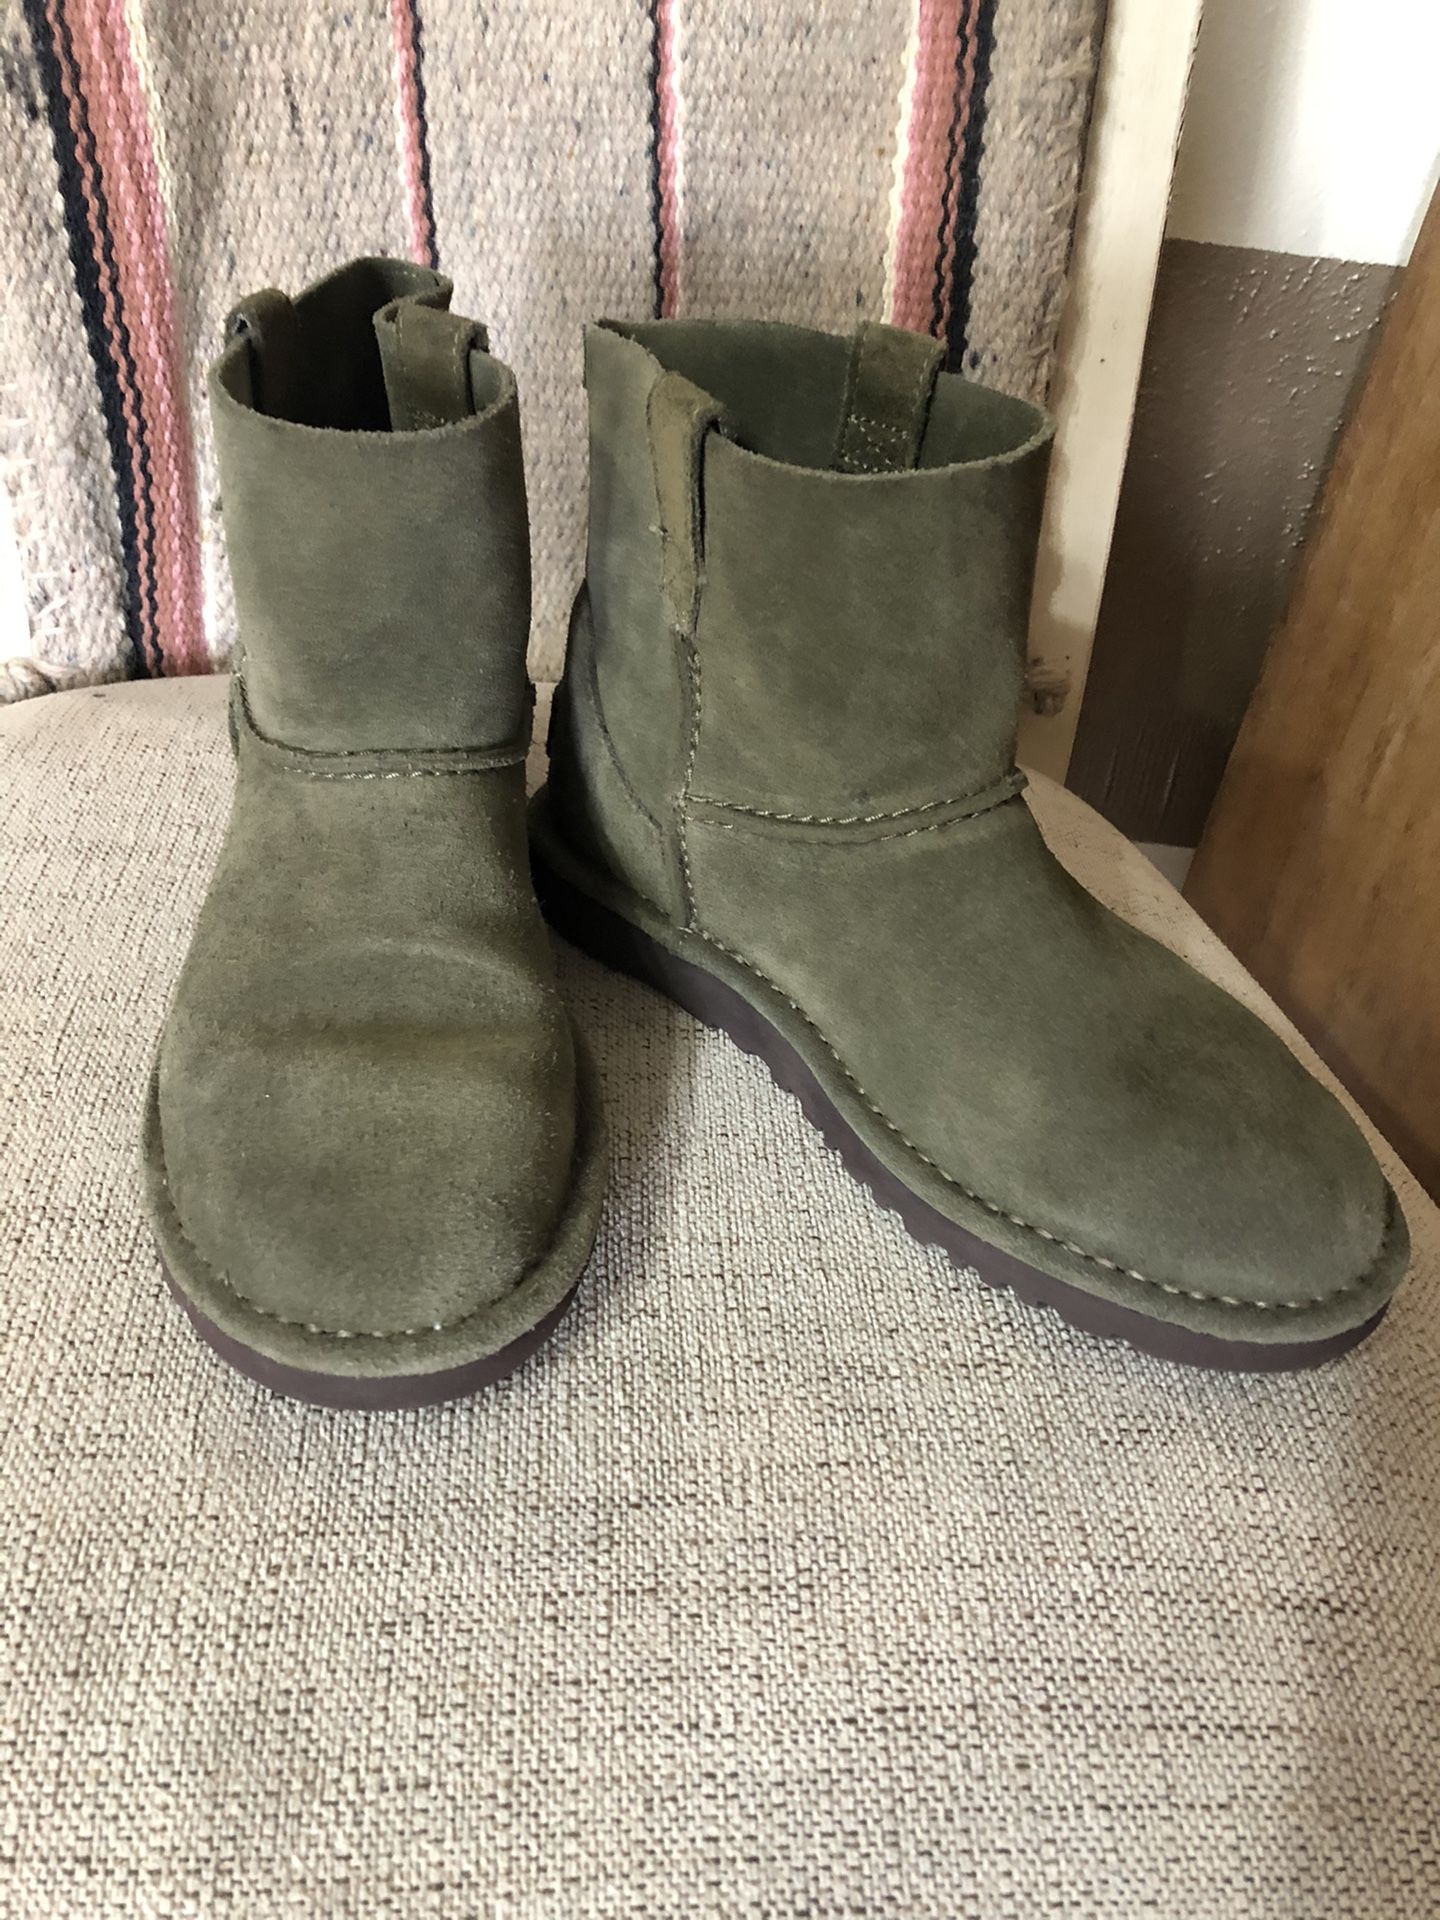 Women’s Ugg Boots size 6